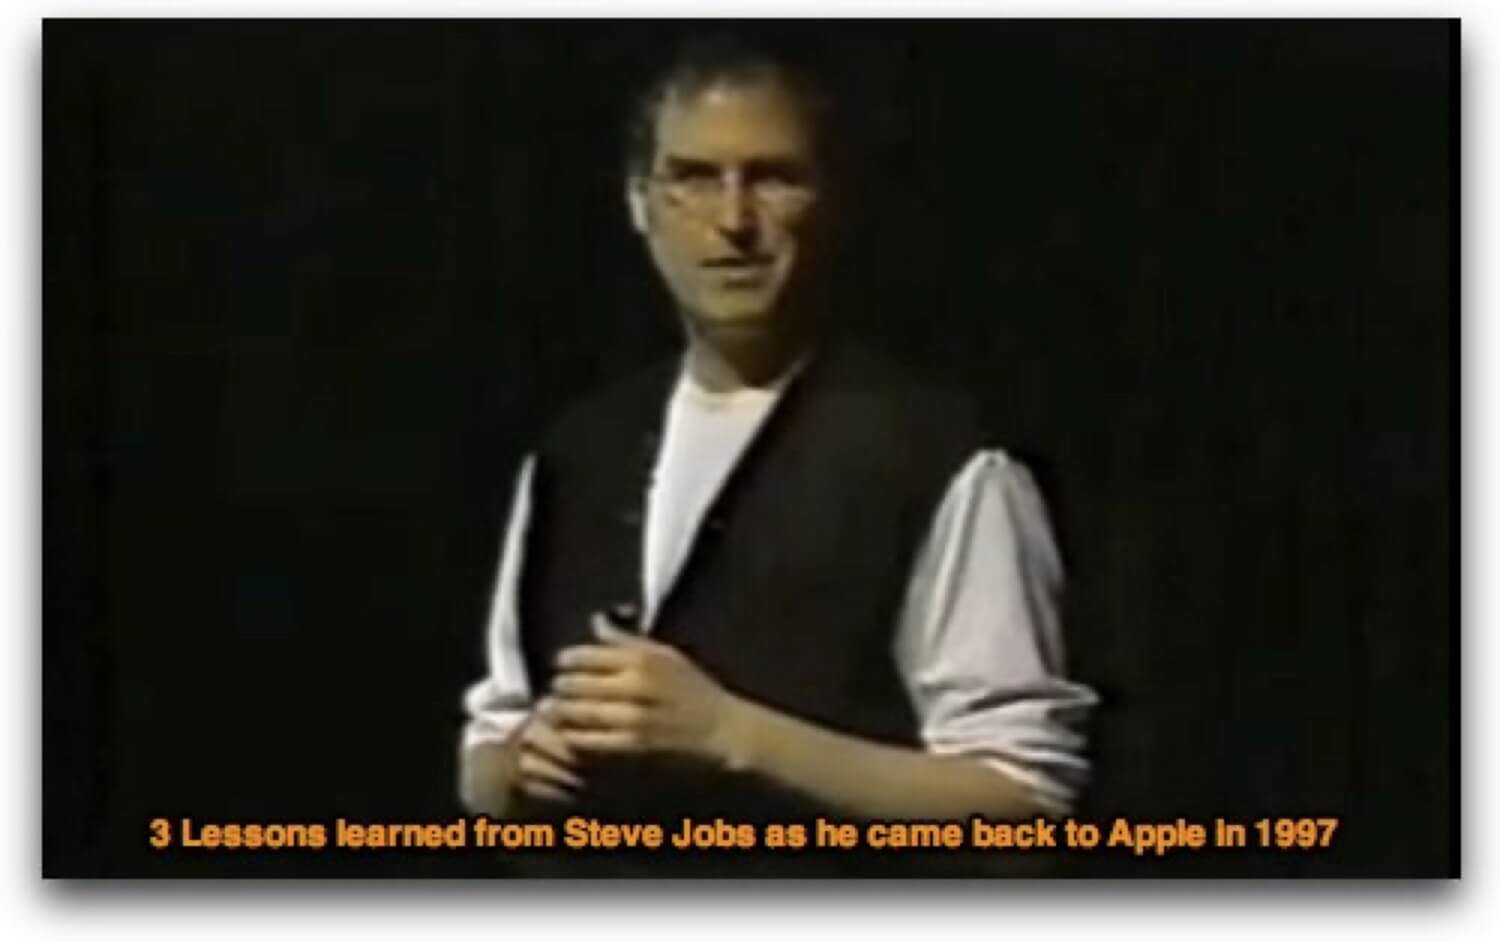 3 lessons learned from Steve Jobs coming back to Apple